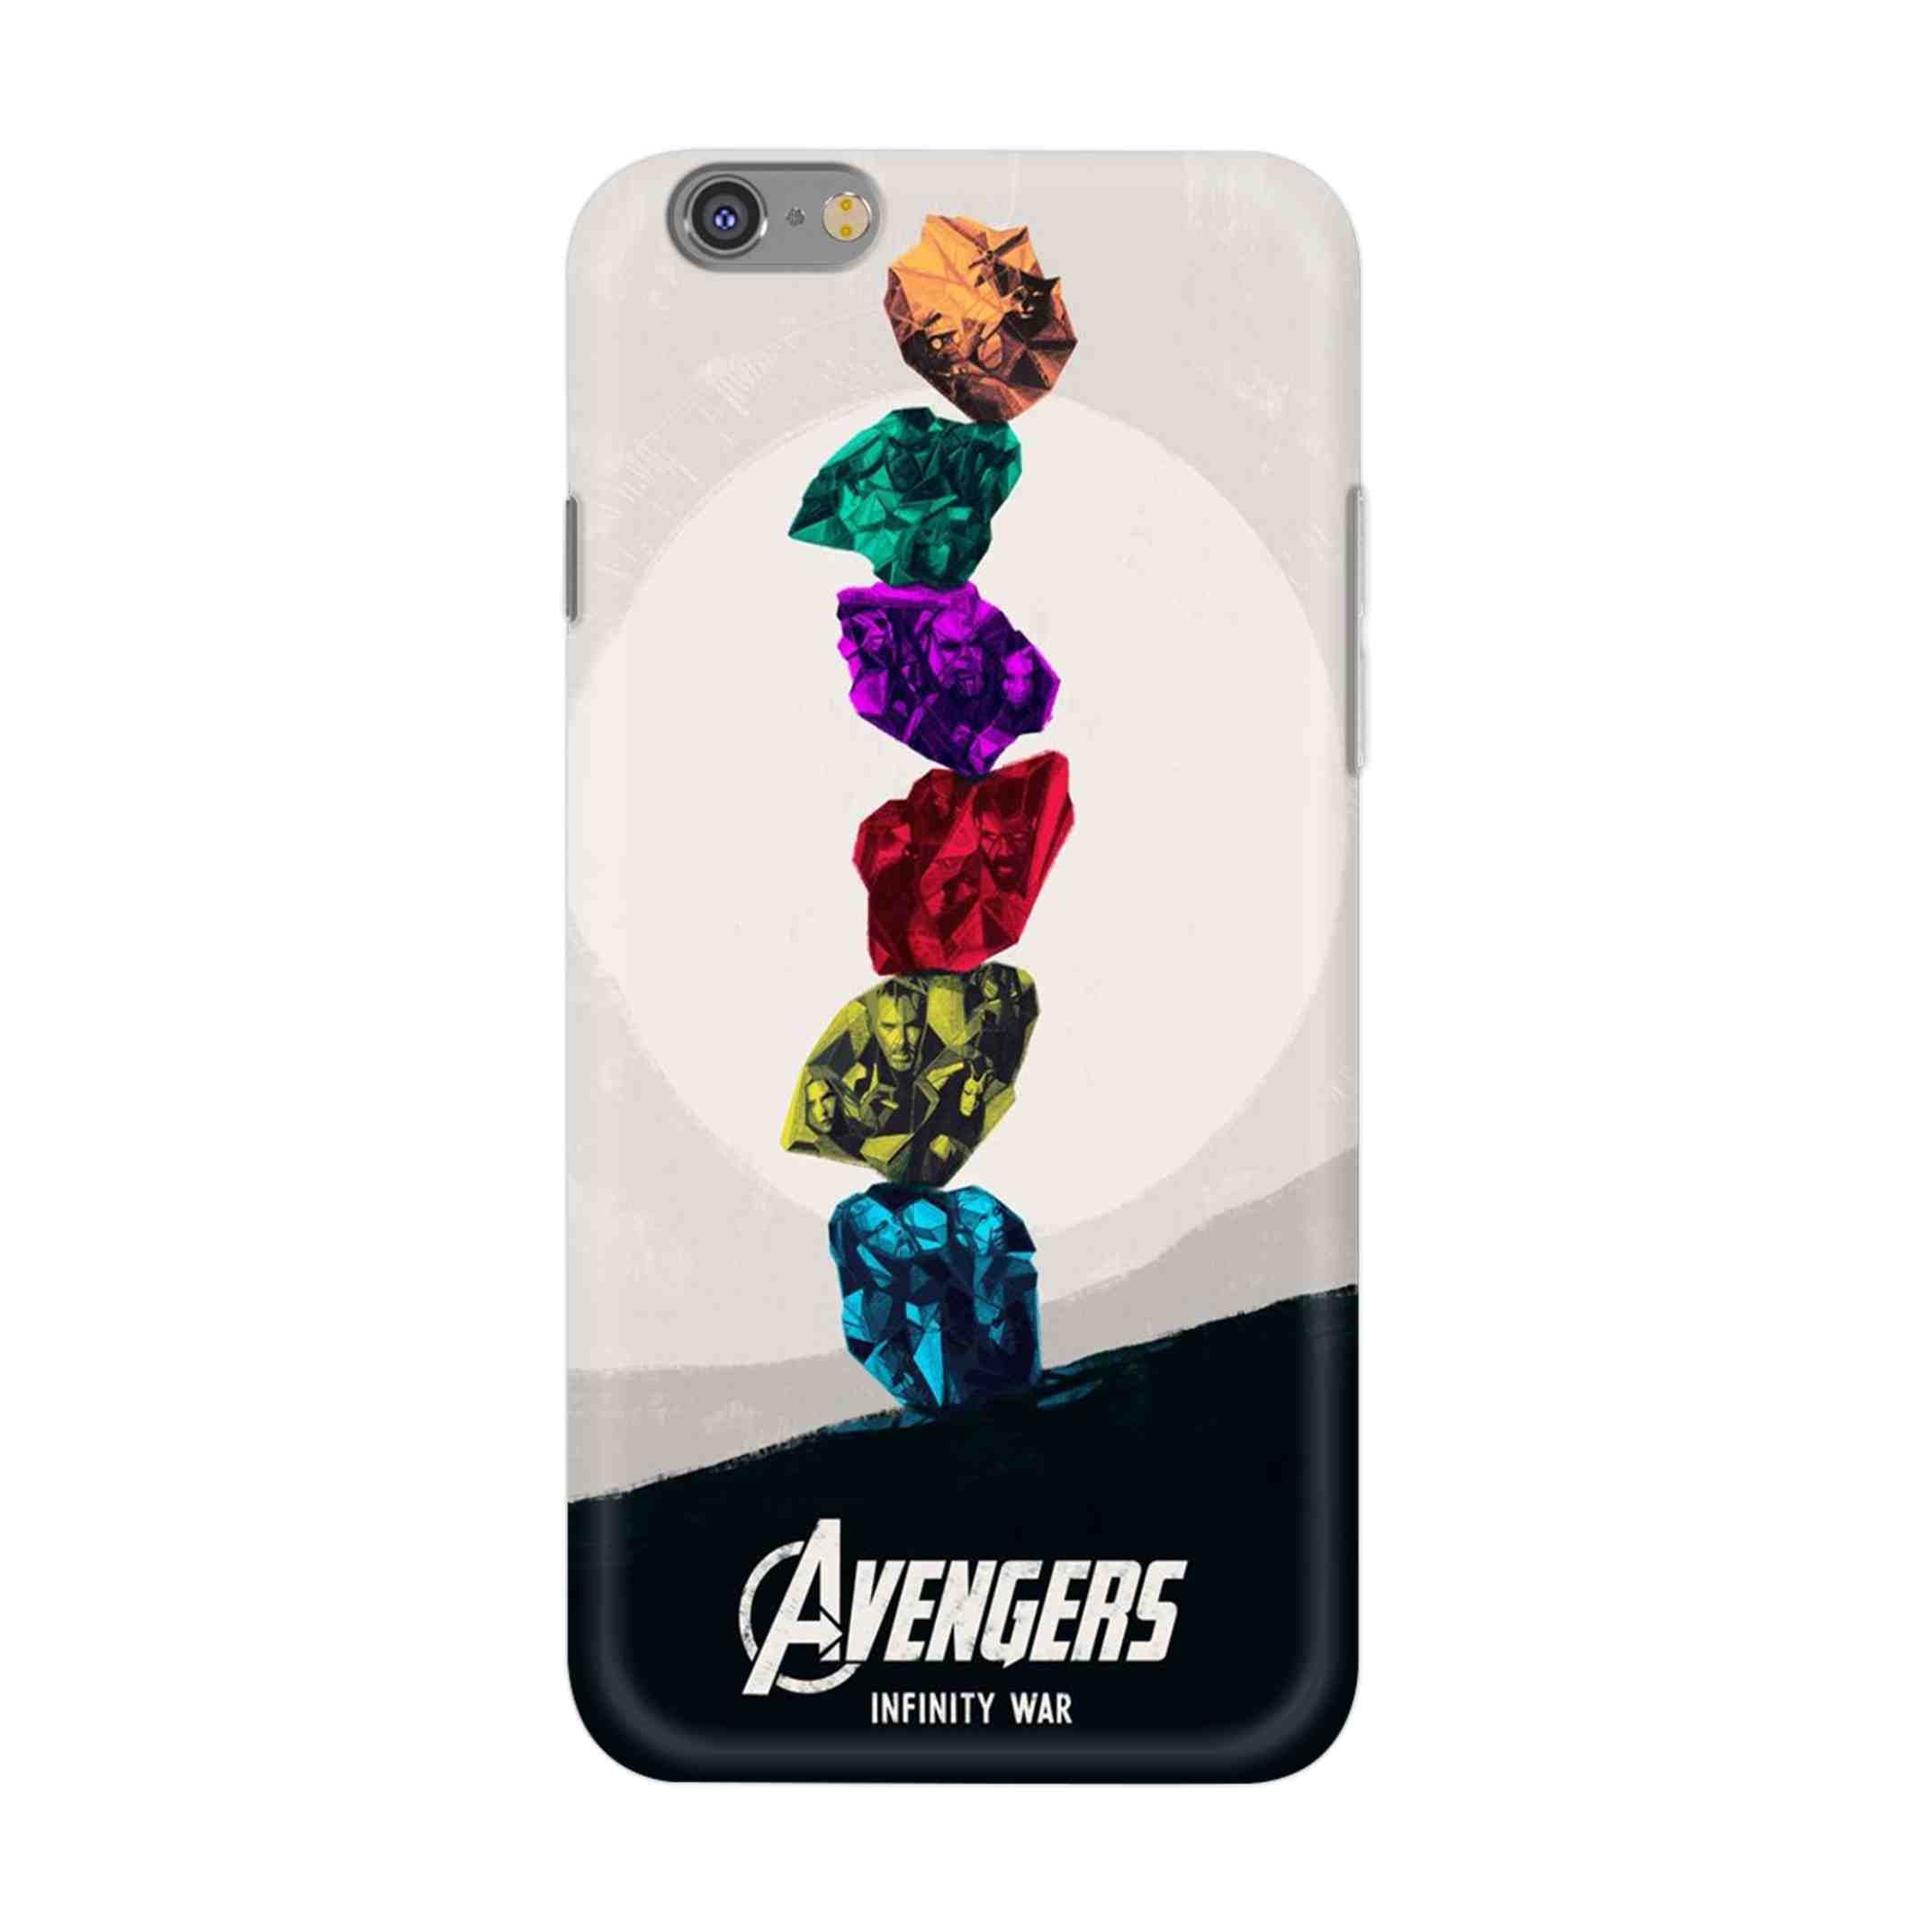 Buy Avengers Stone Hard Back Mobile Phone Case/Cover For iPhone 6 Plus / 6s Plus Online